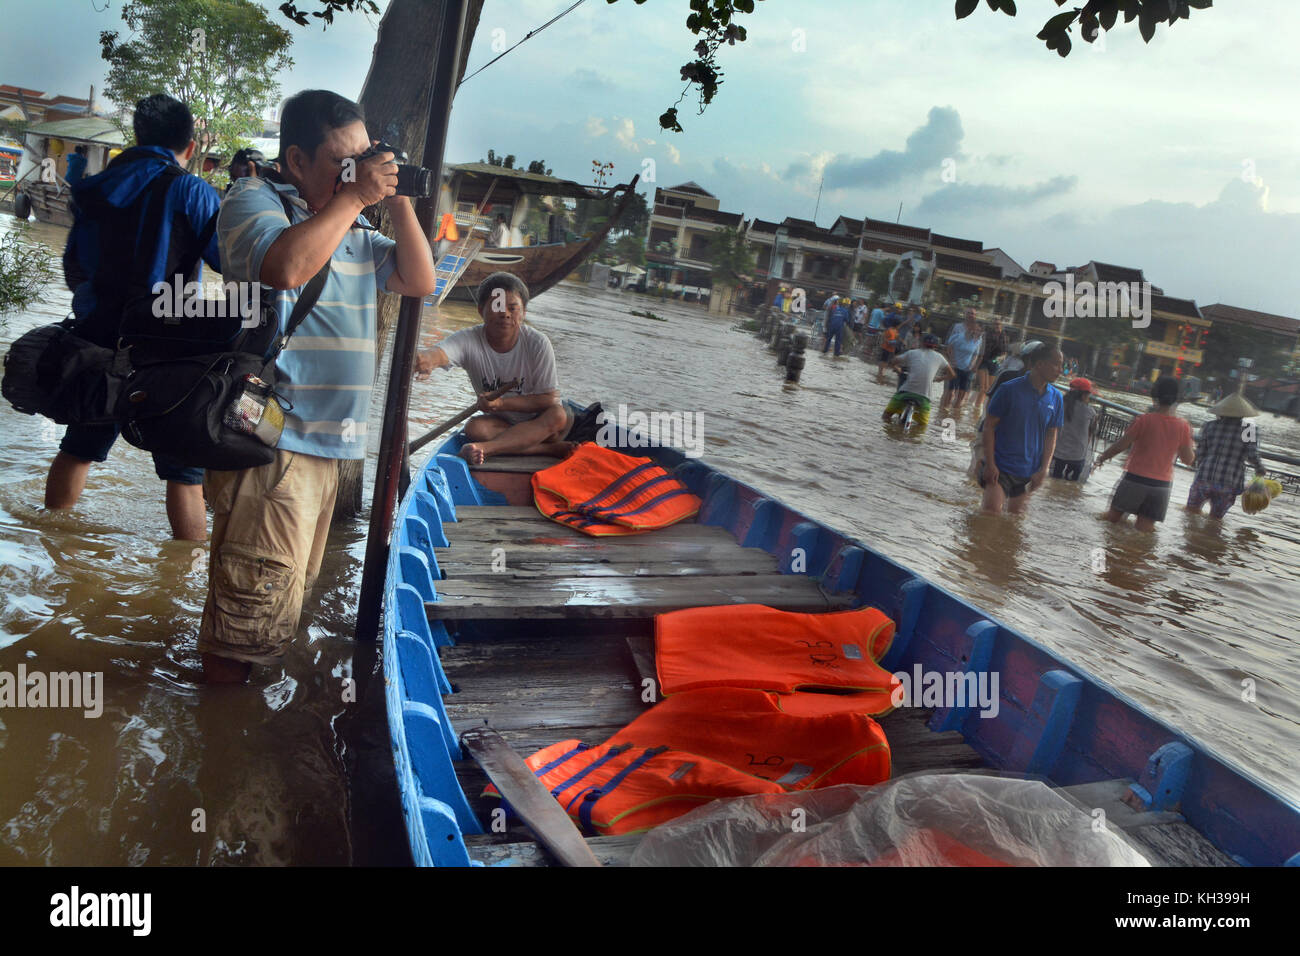 A man tekes a picture of Significant Flooding in Hoi An, Vietnam Stock Photo